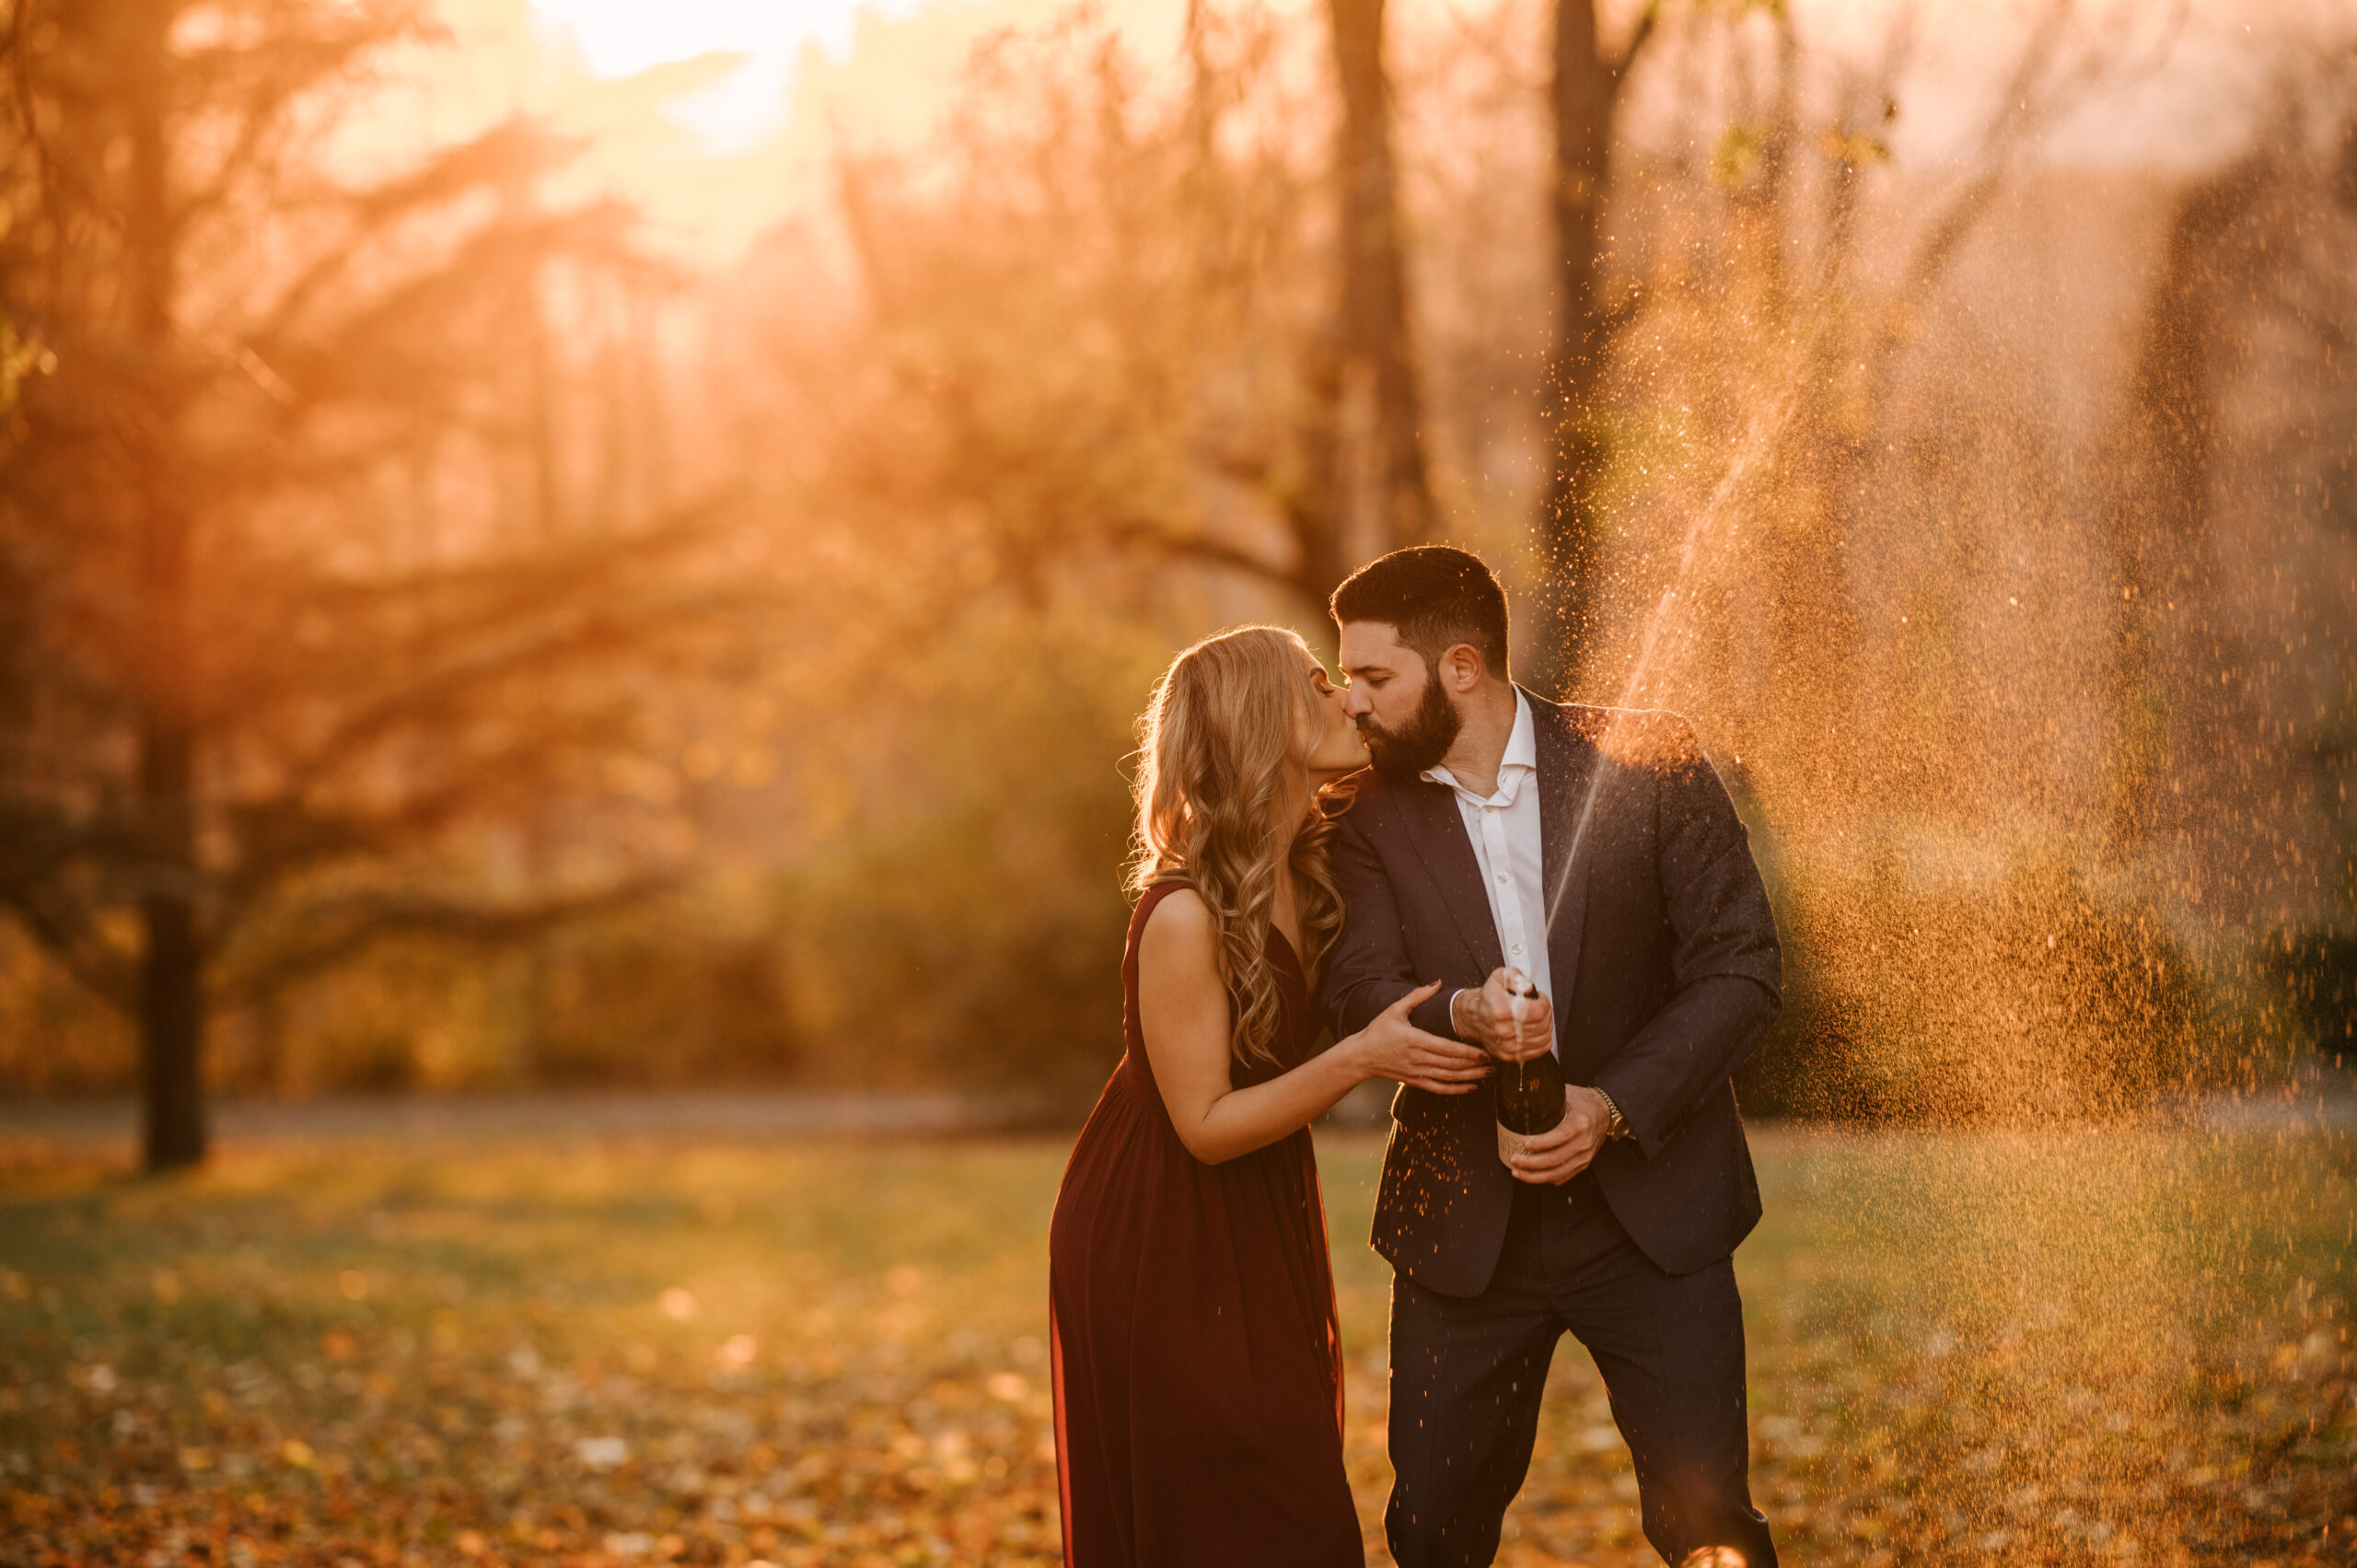 Couple pops champagne at sunset during their engagement session at the New Jersey Botanical Gardens in Ringwood NJ. The Castle at Skylands Manor during golden hour